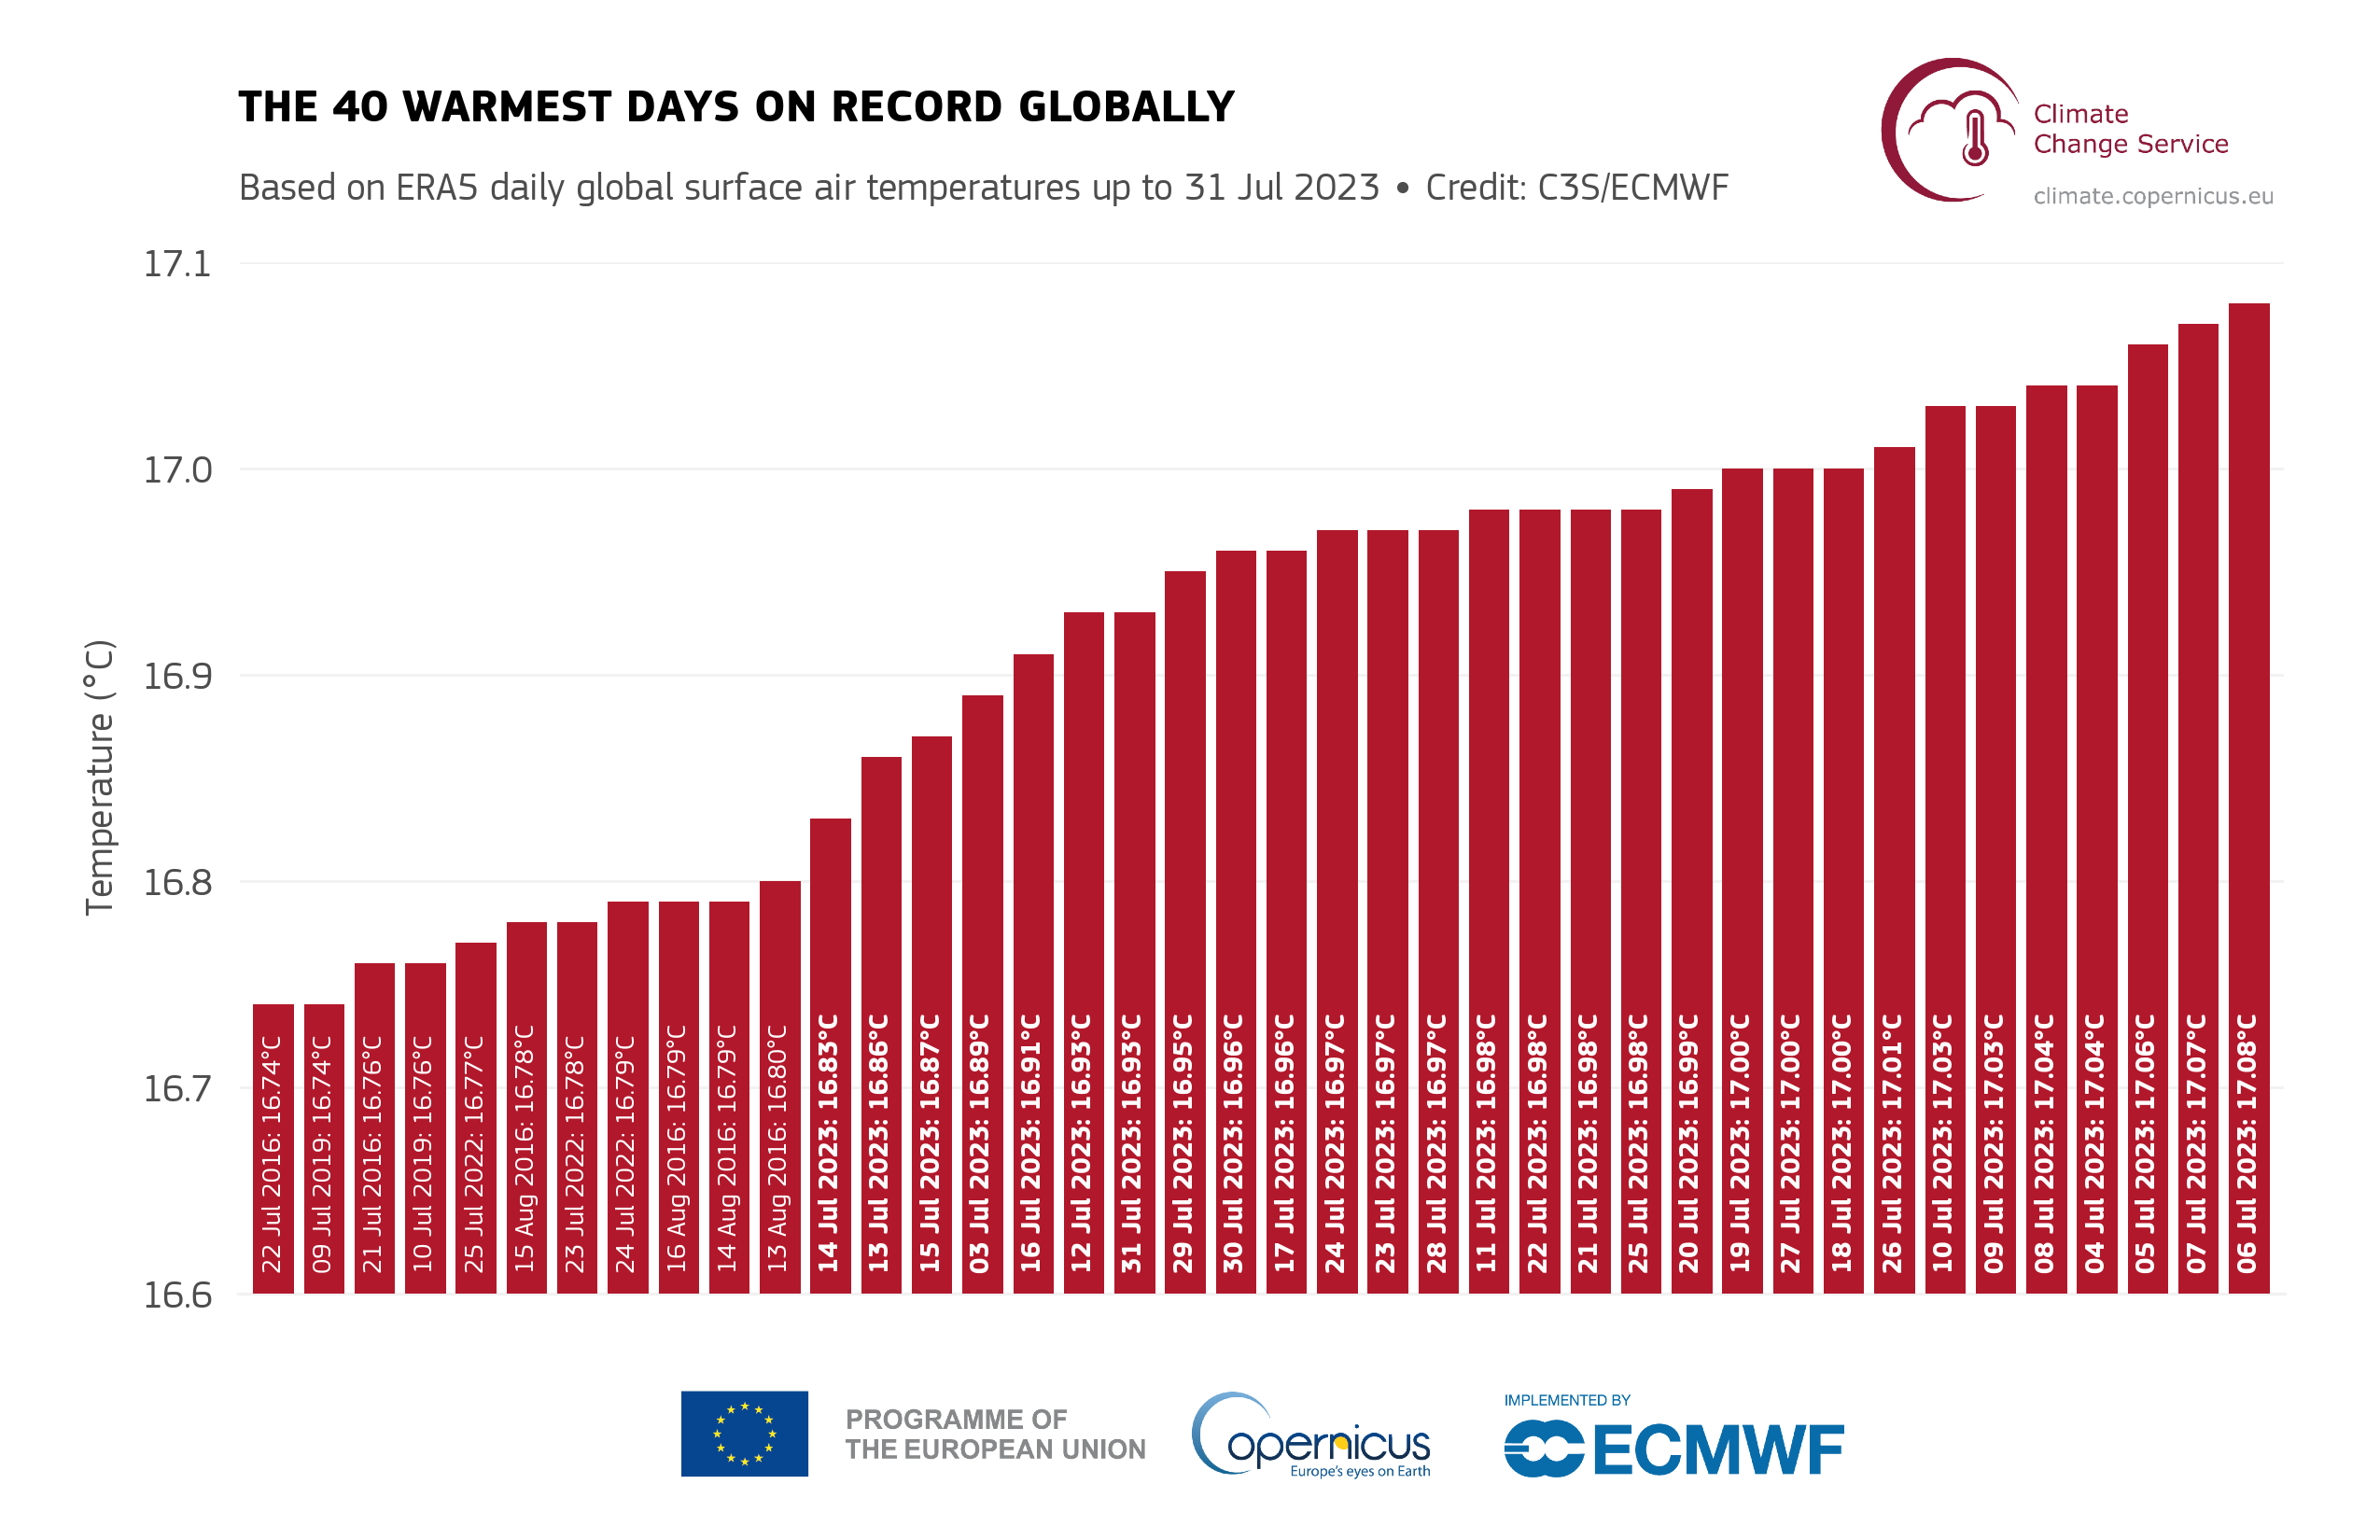 Ranking of the top 40 warmest days in the ERA5 dataset based on globally averaged surface air temperature. Days in July 2023 are highlighted in bold. Data: ERA5. COPERNICUS CLIMATE CHANGE SERVICE, ECMWF/Graphic